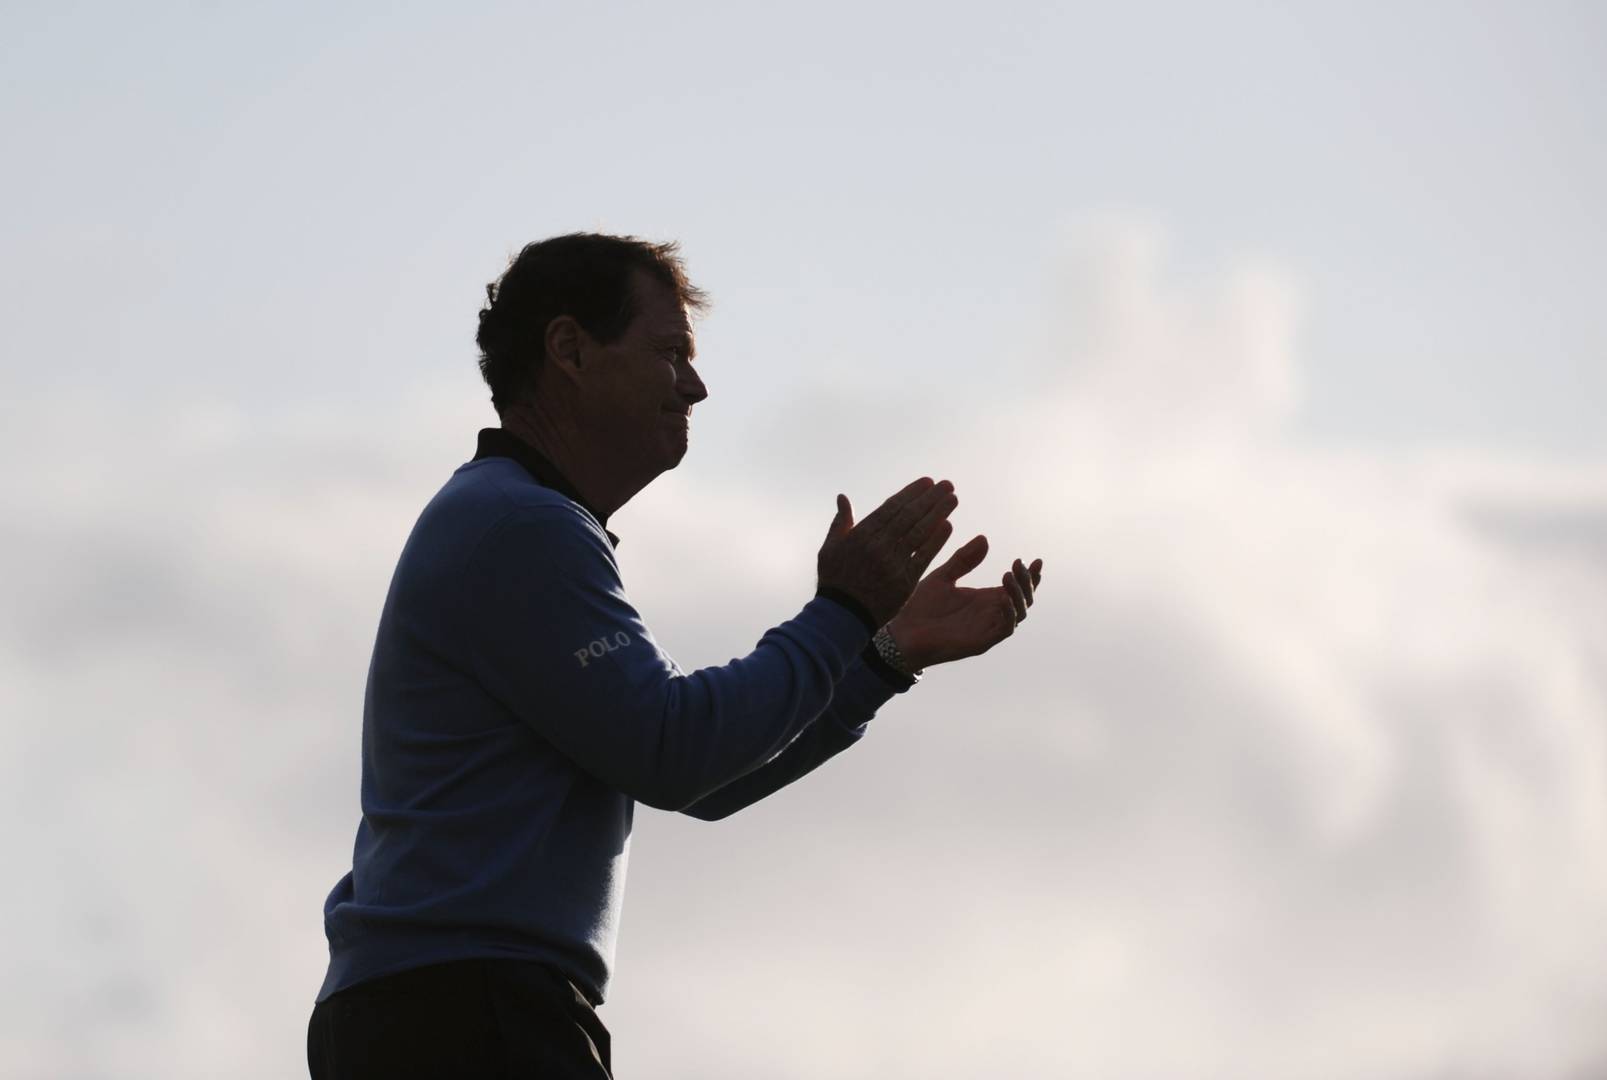 Tom Watson at the 2009 Open Championship